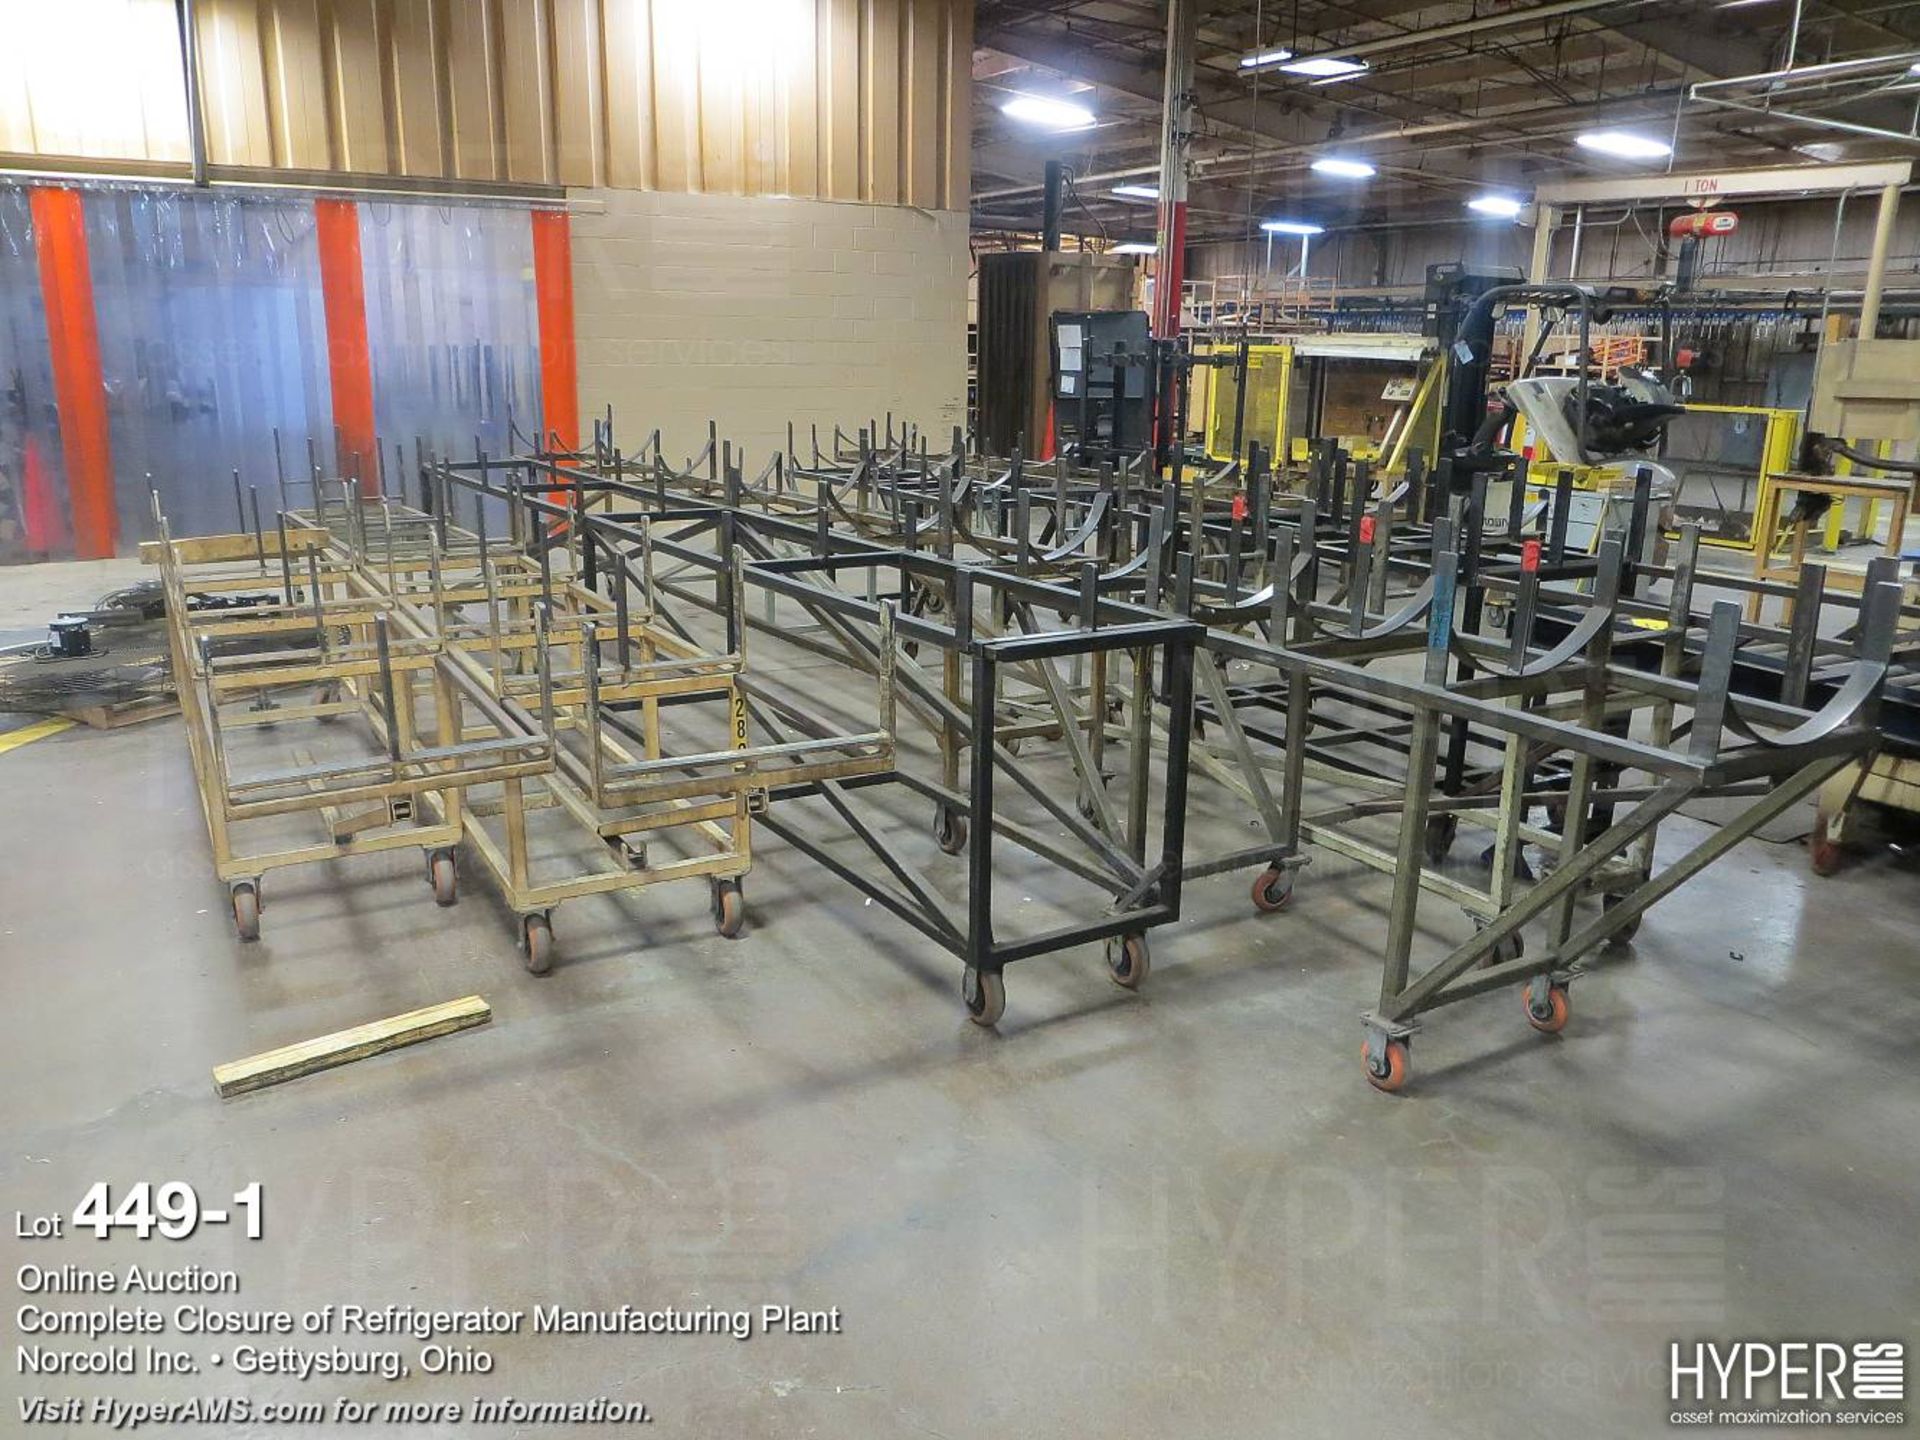 (10) steel stock carts various lengths 7'-18' - Image 2 of 2